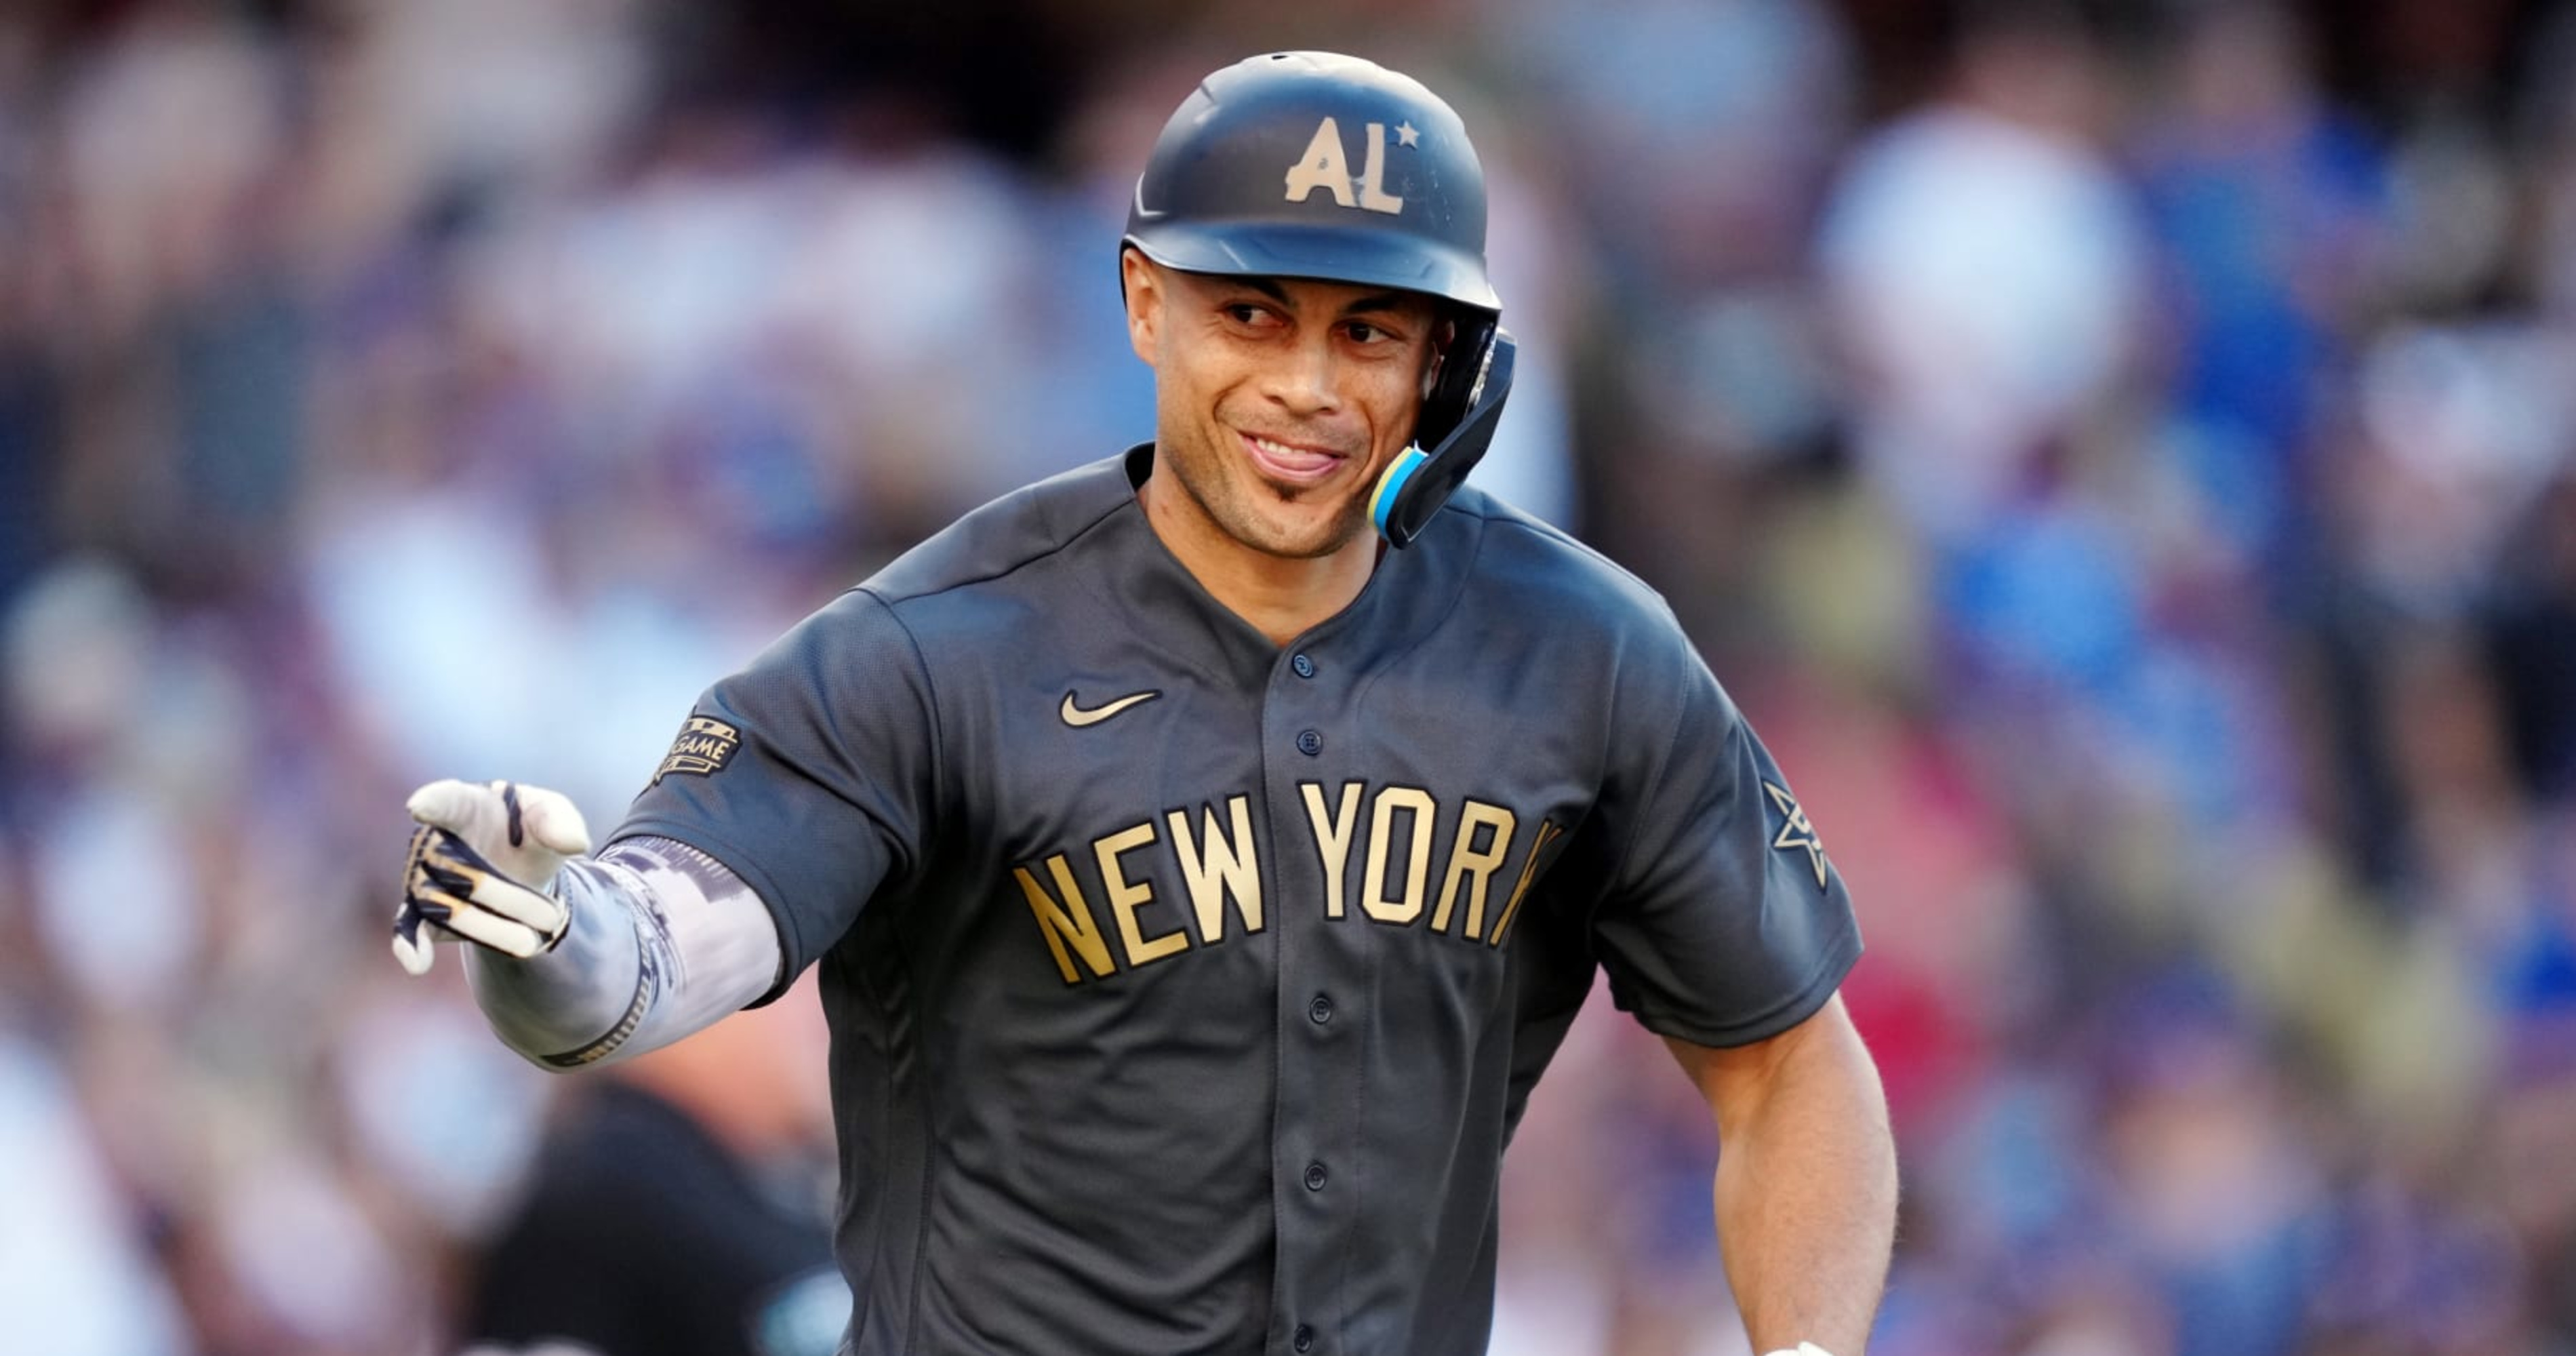 2022 MLB All-Star Game: Giancarlo Stanton wins MVP with monster